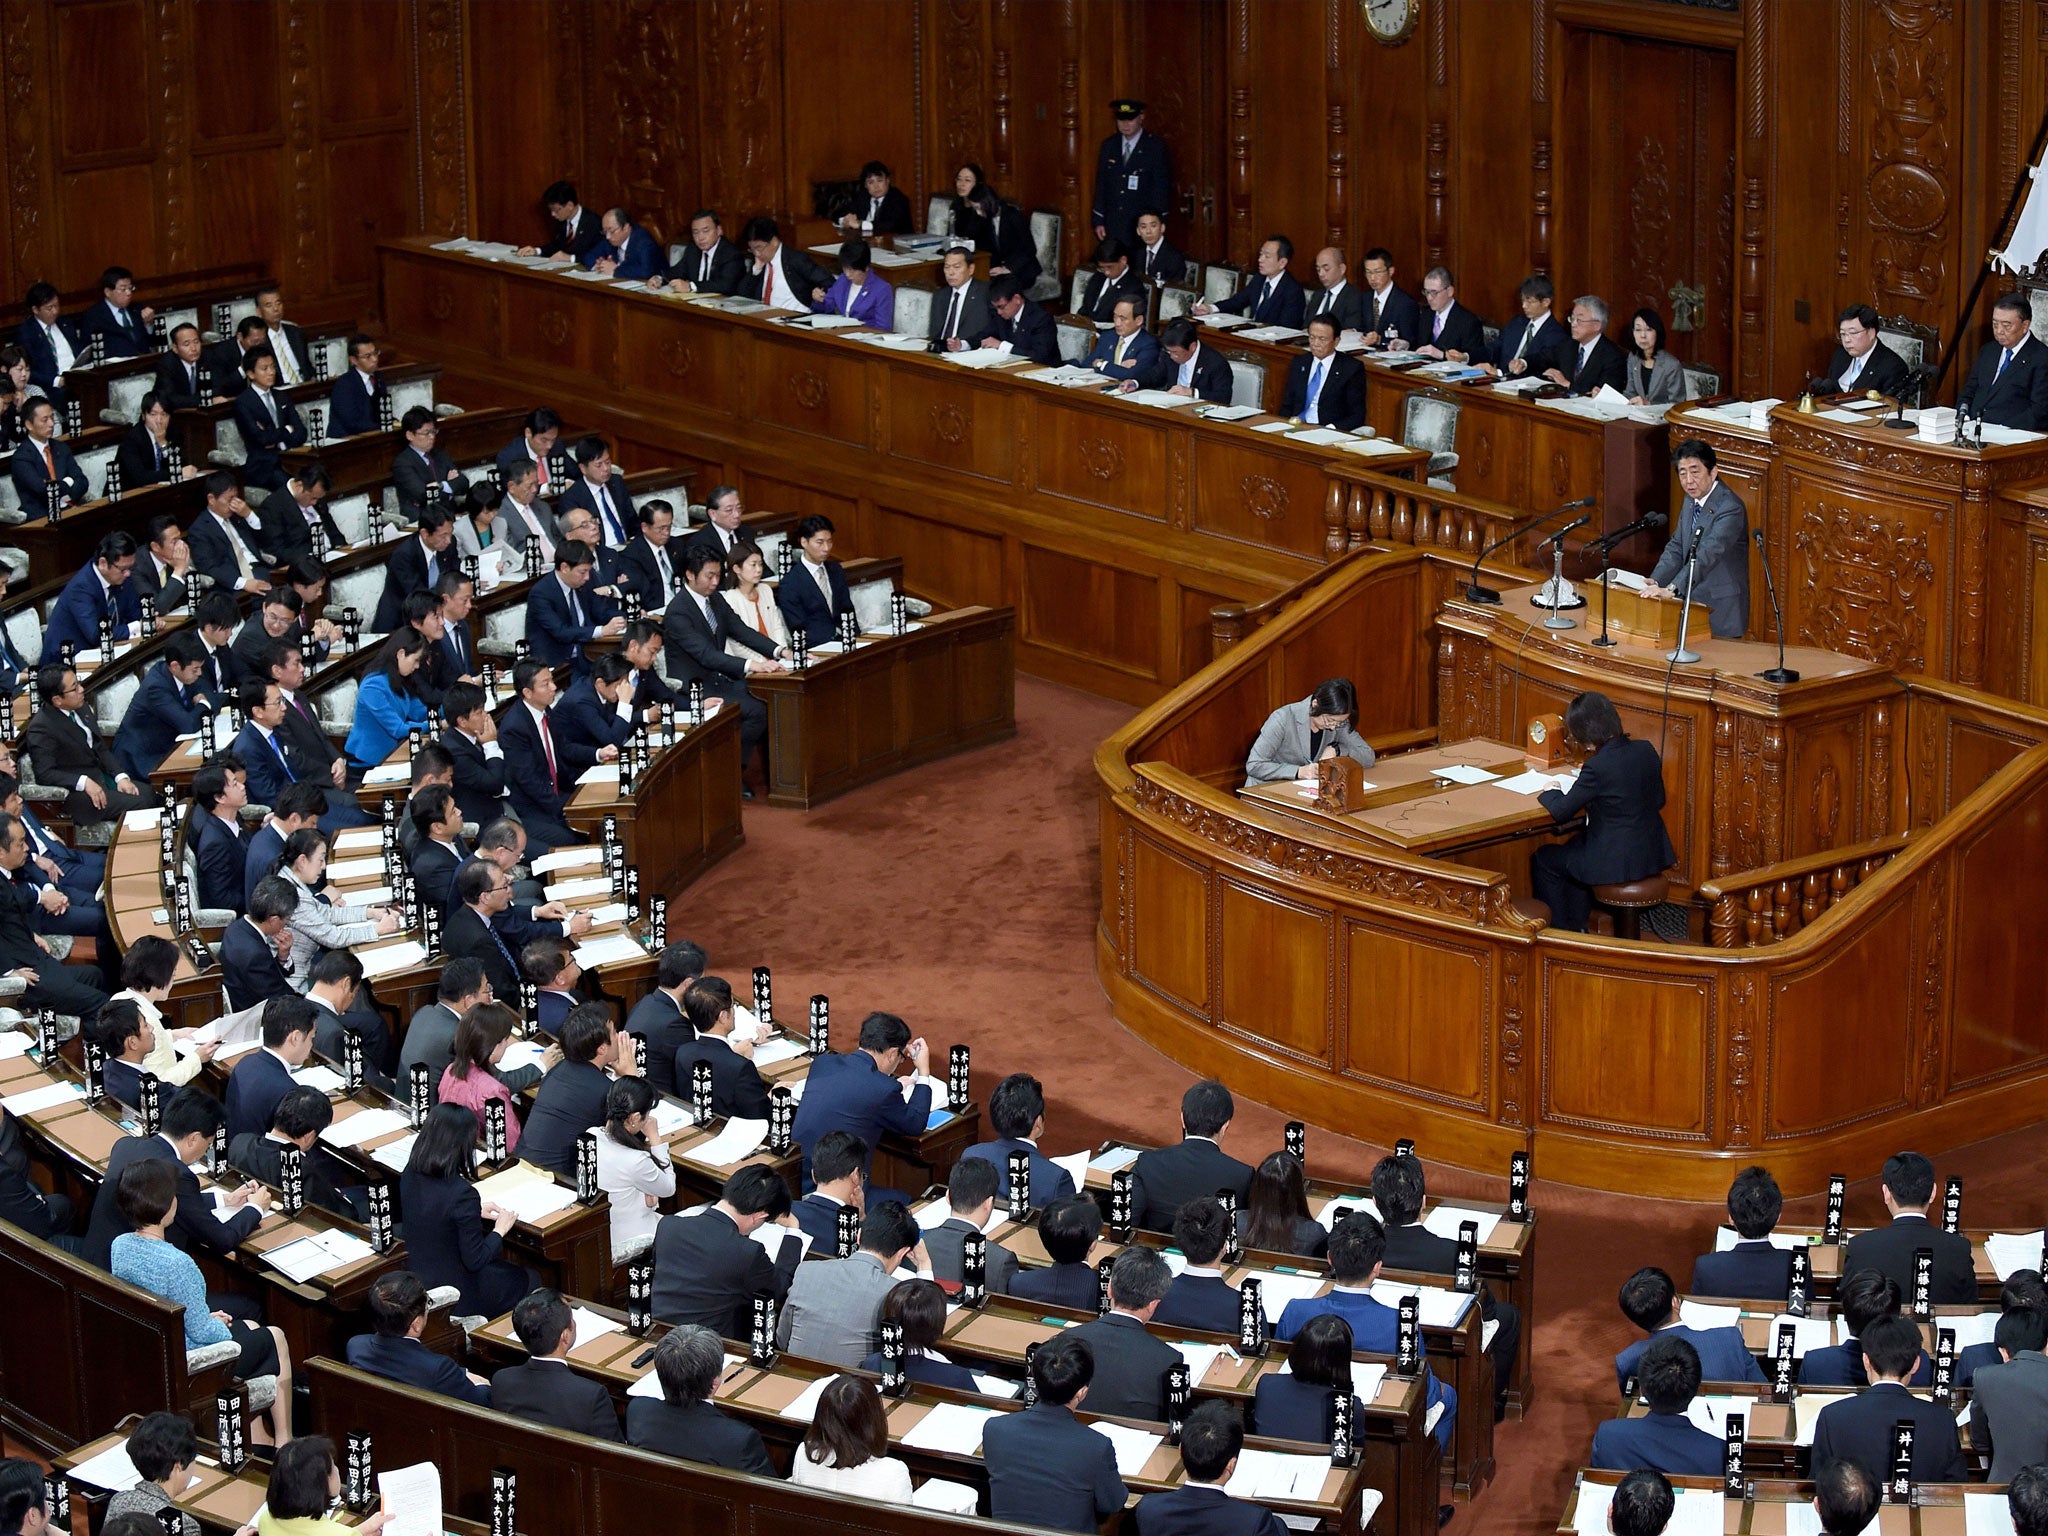 Shinzo Abe answers questions during a session of the lower house of parliament in Tokyo on 20 November